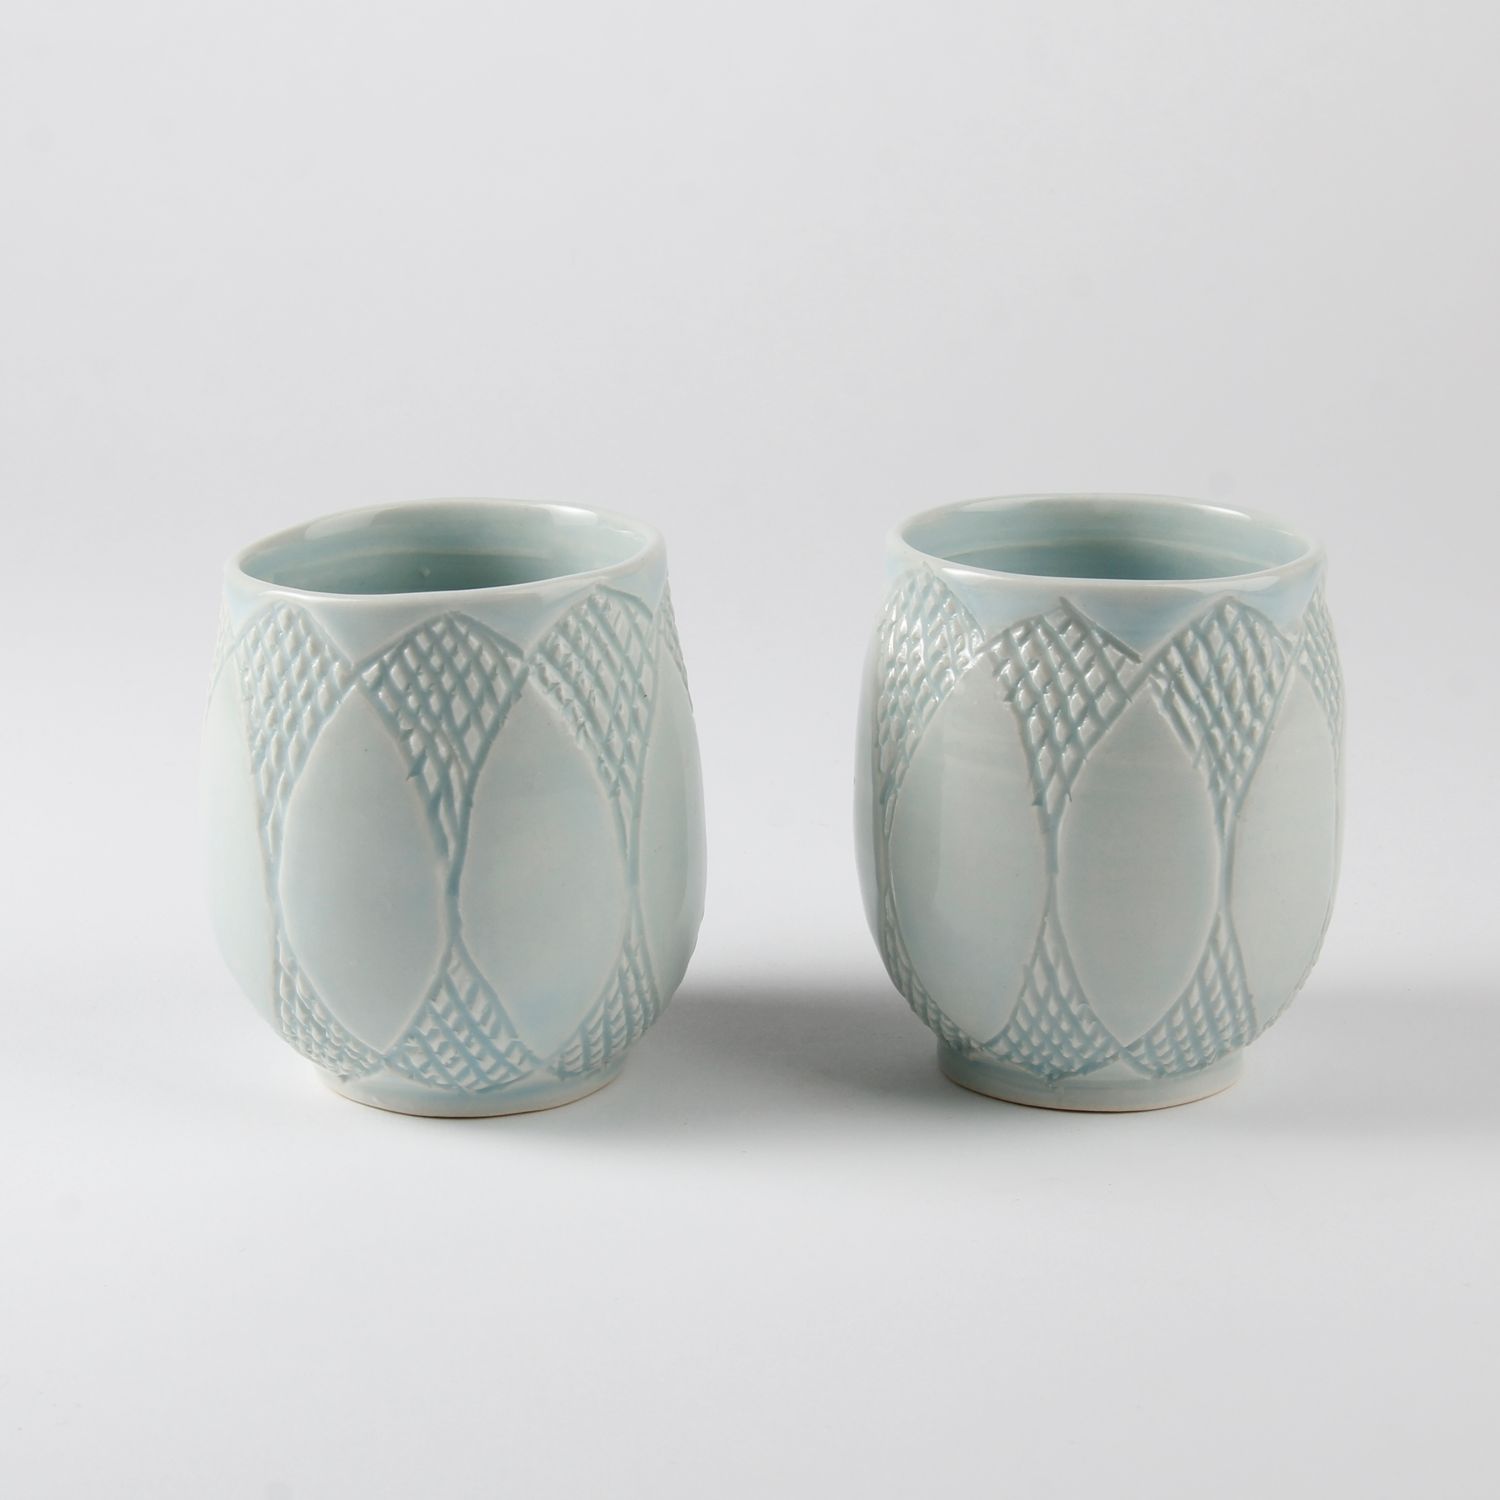 Arlene KushnirL Carved Cup – Celadon (Each sold separately) Product Image 1 of 1